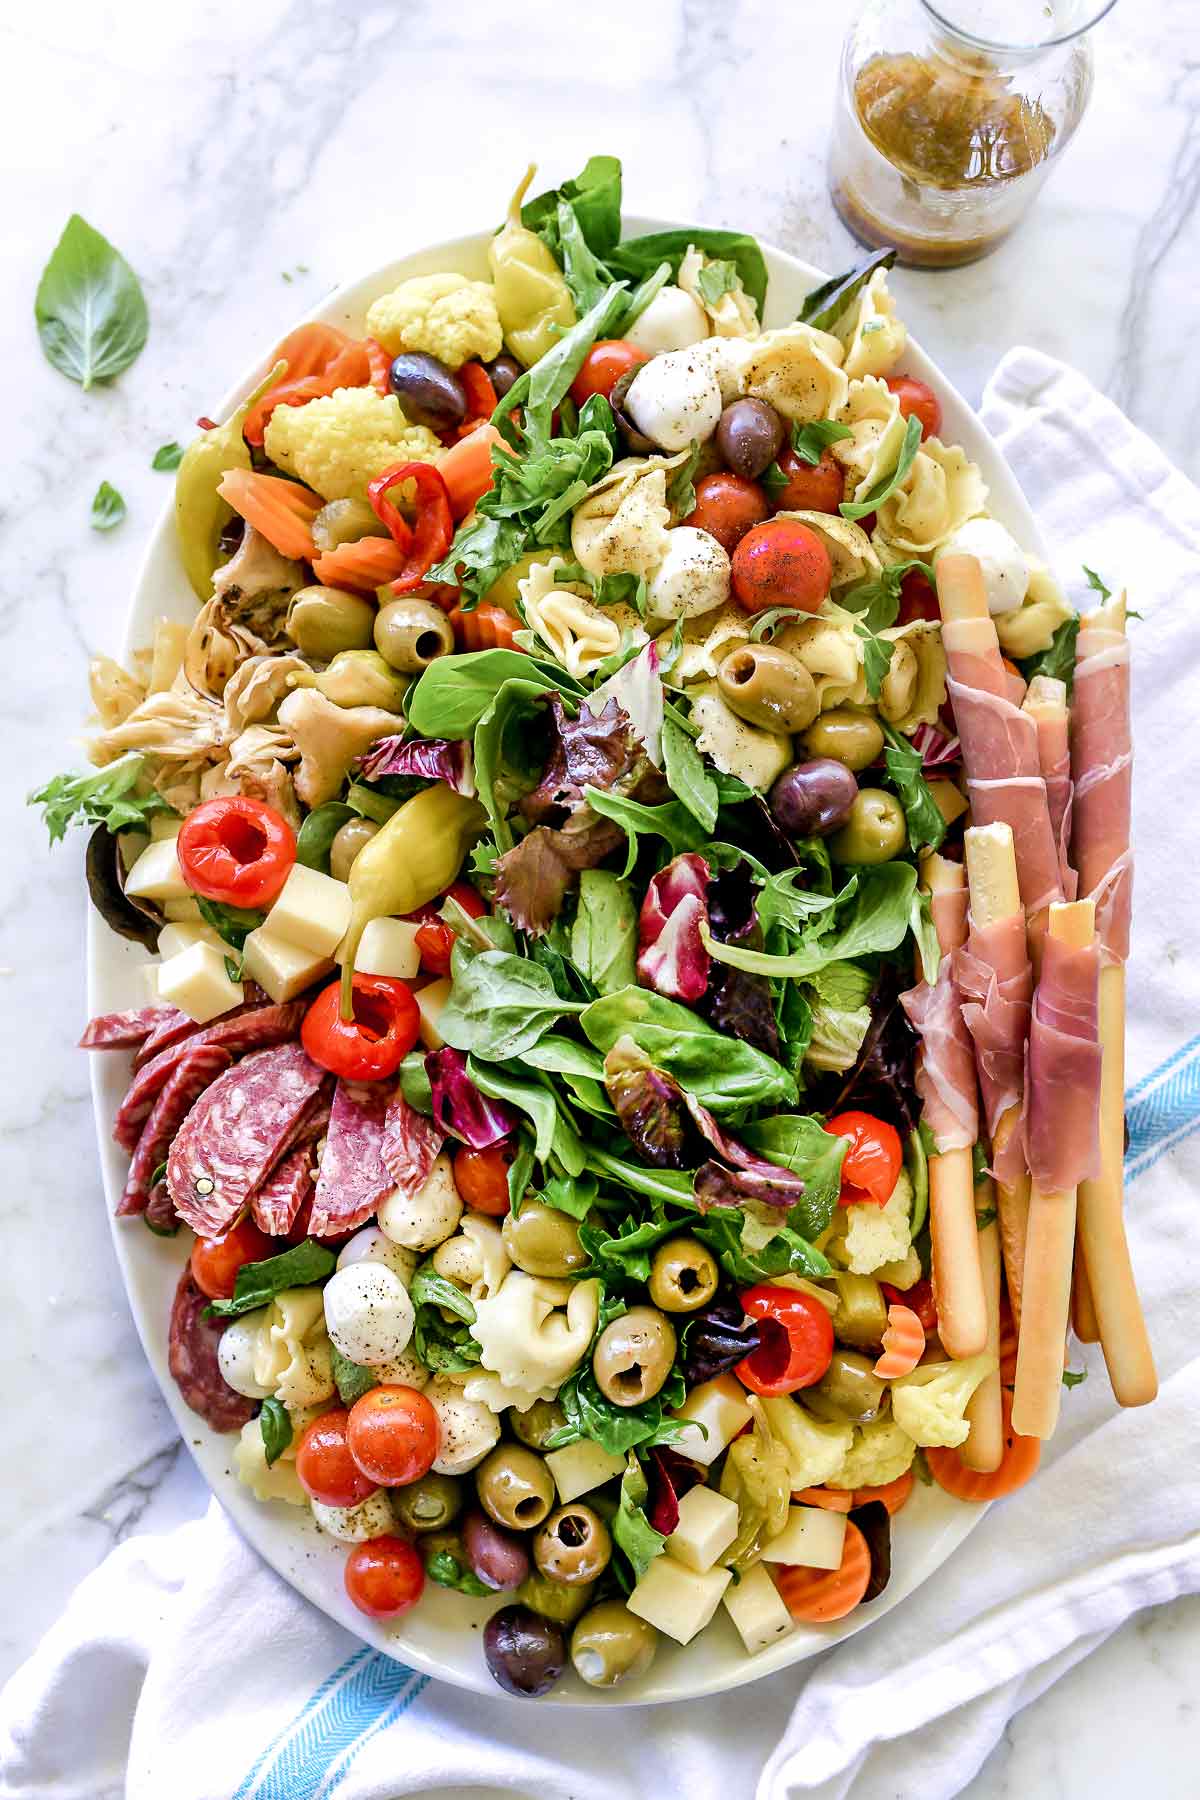 How to Make an Awesome Antipasto Salad Platter ...